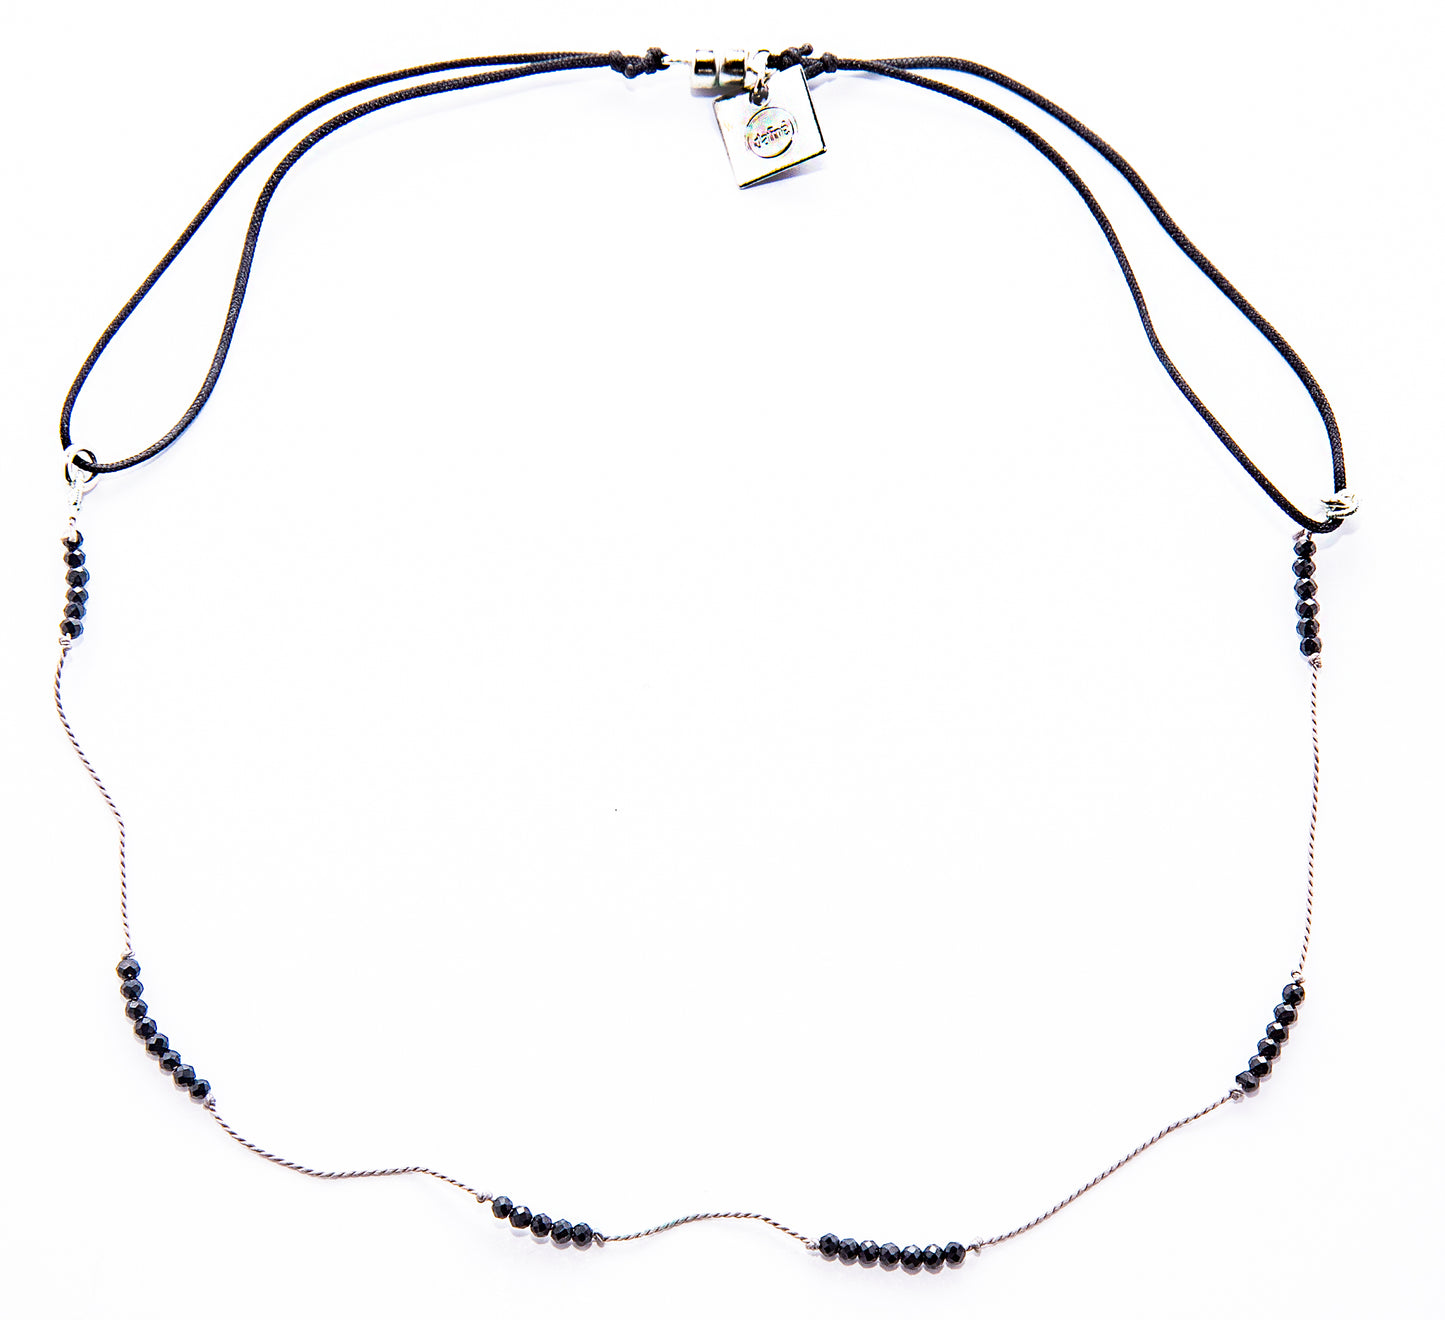 Starlette Choker: Black Spinel with Grey, Sterling Silver by Dafné